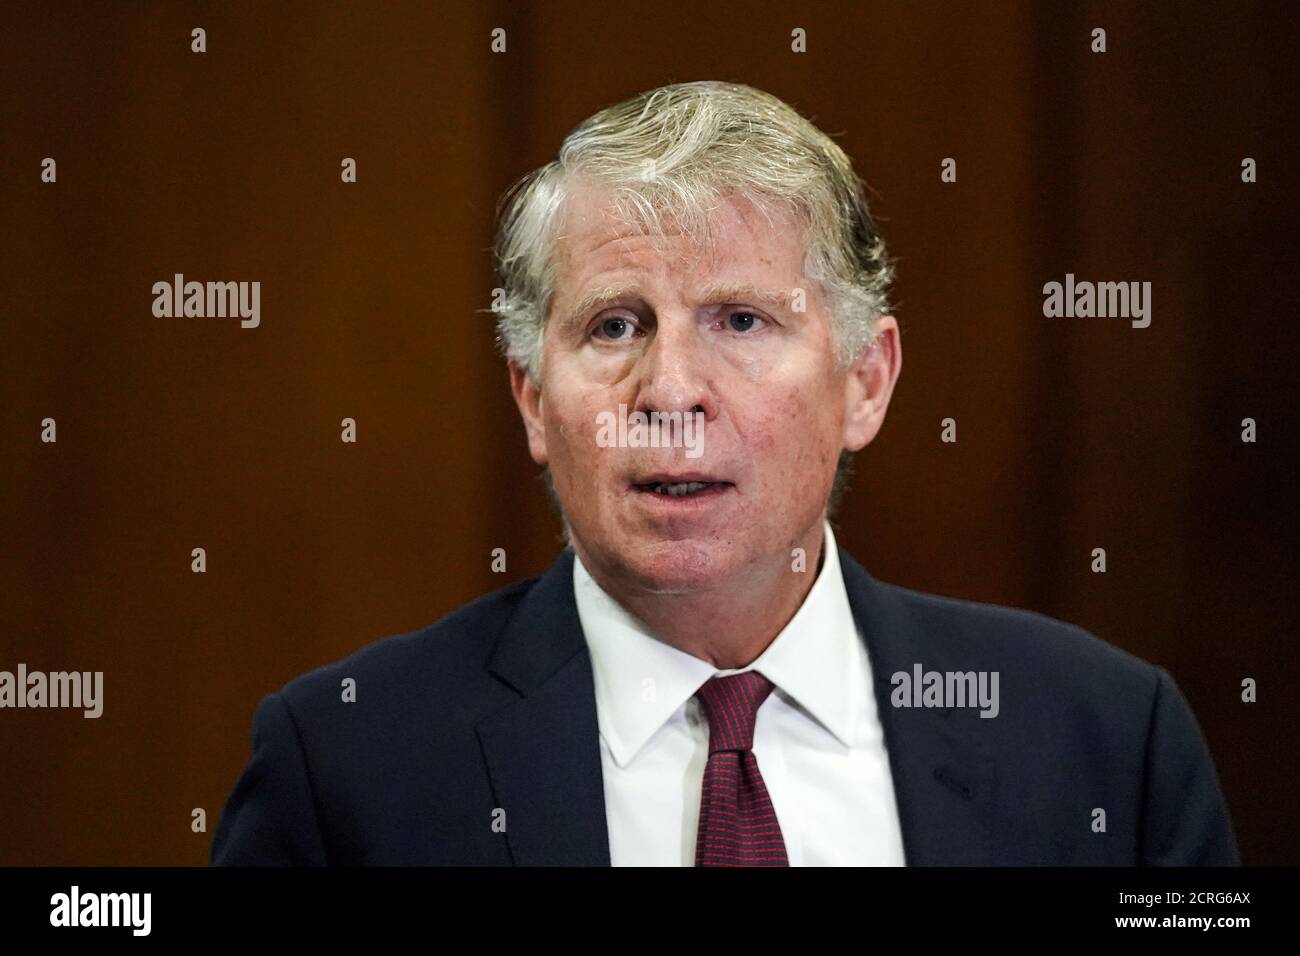 Manhattan District Attorney Cyrus R. Vance Jr. speaks at a news conference about dismissing some 3,000 marijunana smoking and possession cases in New York City, U.S., September 12, 2018. REUTERS/Jeenah Moon Stock Photo